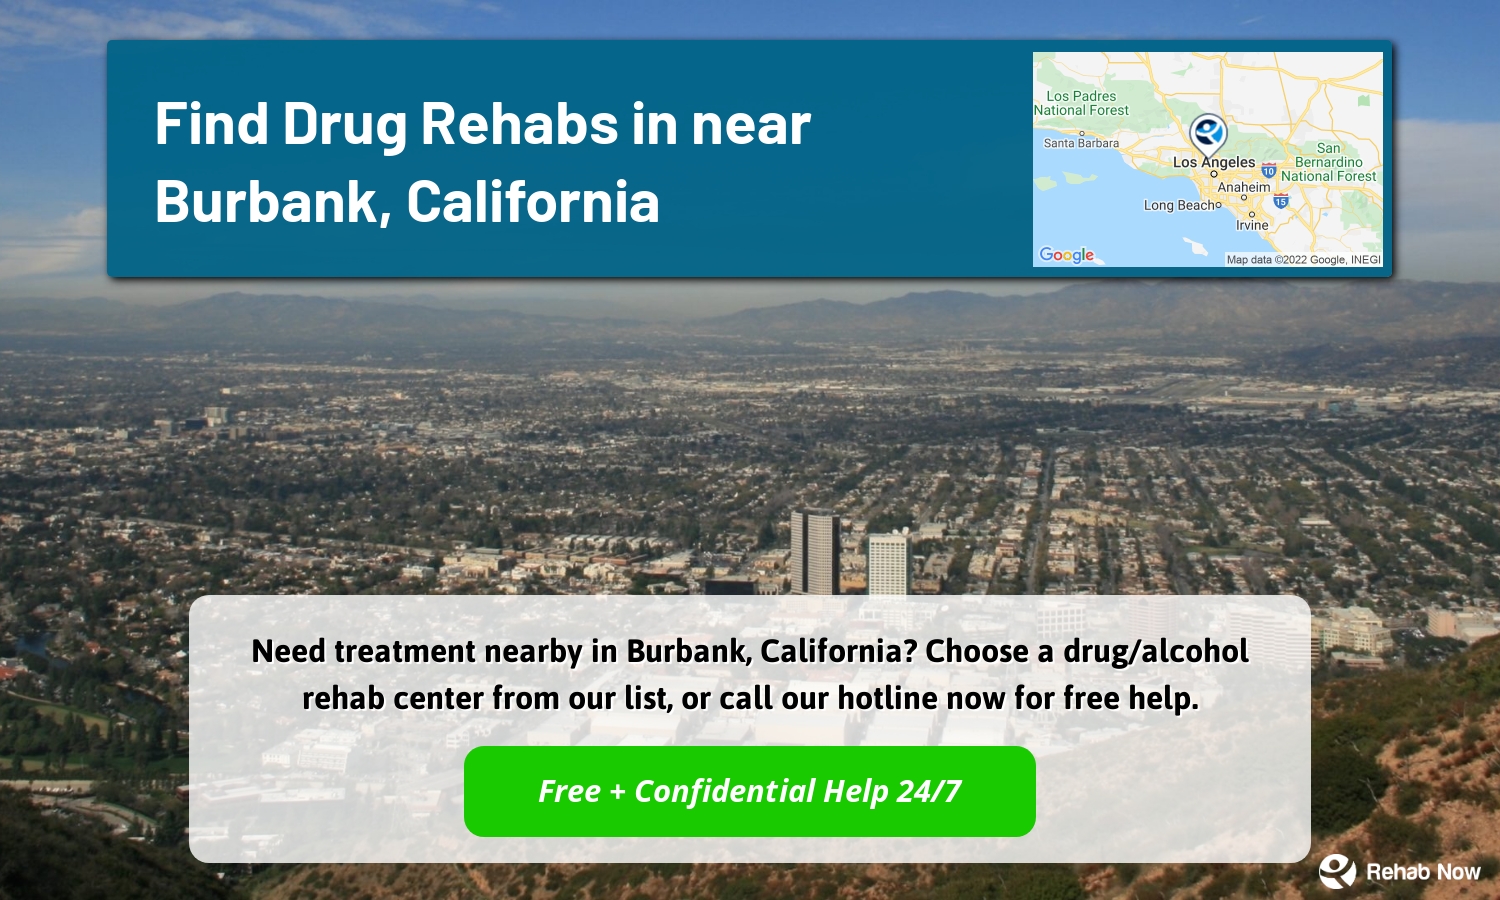 Need treatment nearby in Burbank, California? Choose a drug/alcohol rehab center from our list, or call our hotline now for free help.